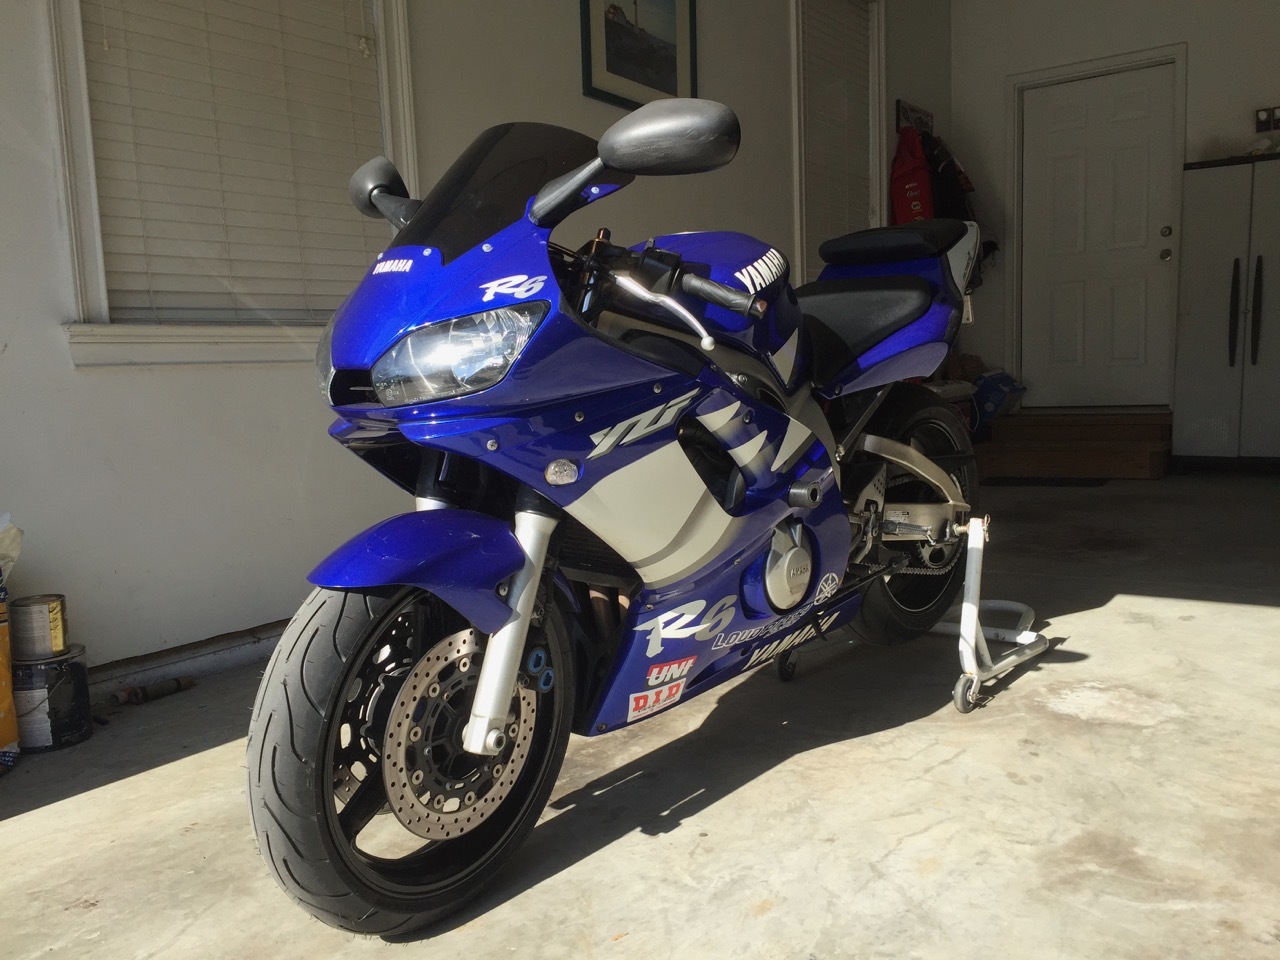 R6 ready for track days